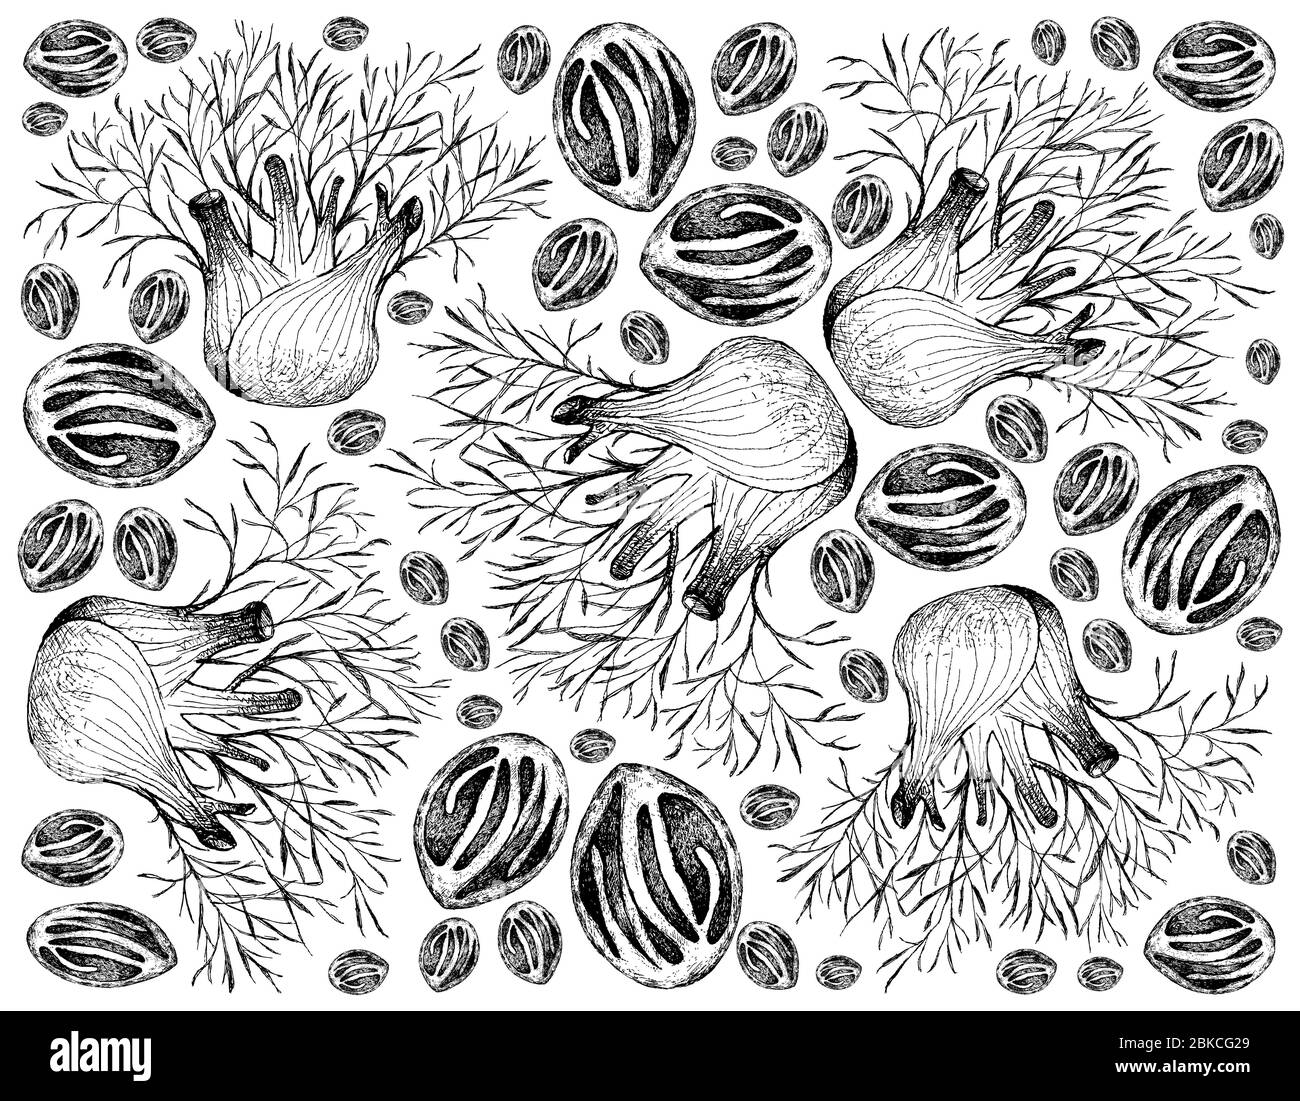 Herbal Plants, Illustration of Hand Drawn Sketch Fresh Fennel or Foeniculum Vulgare Bulb and Nutmeg Fruits Used for Seasoning in Cooking. Stock Photo